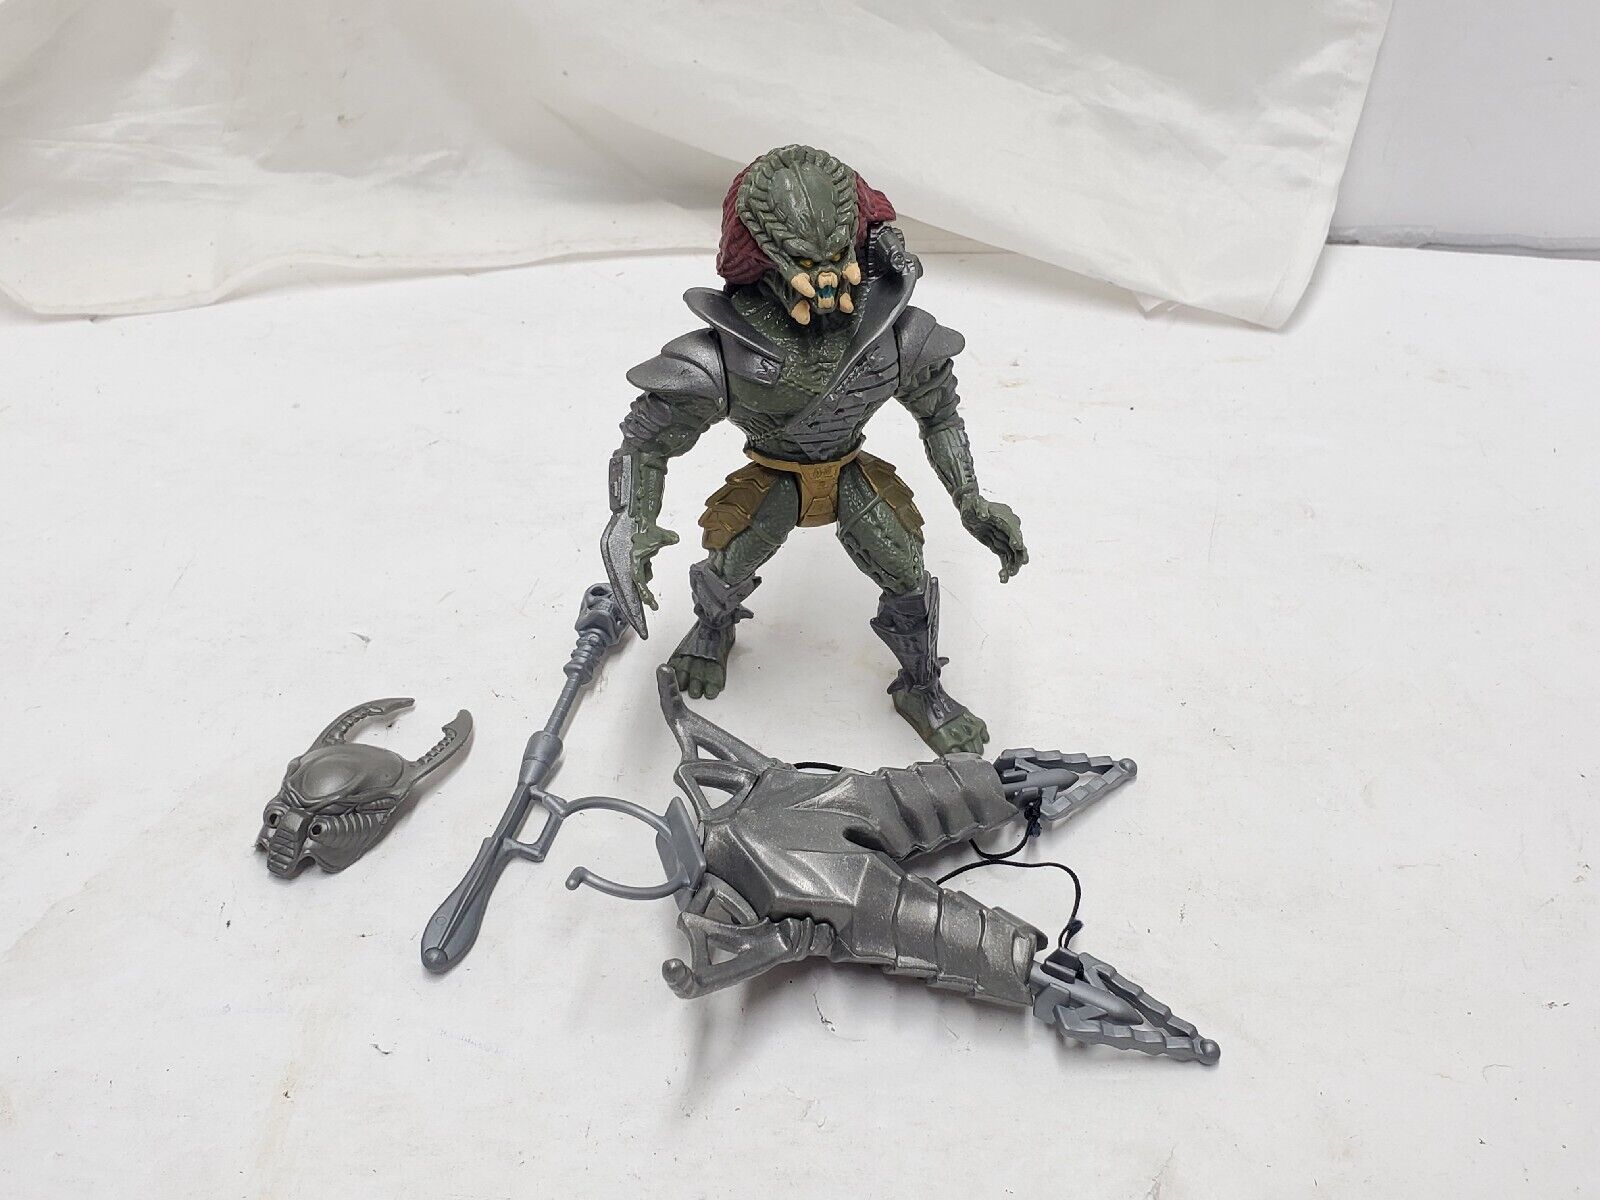 Scavage Predator Action Figure Kenner w/ Bola Blasting Action 1993 100% Complete